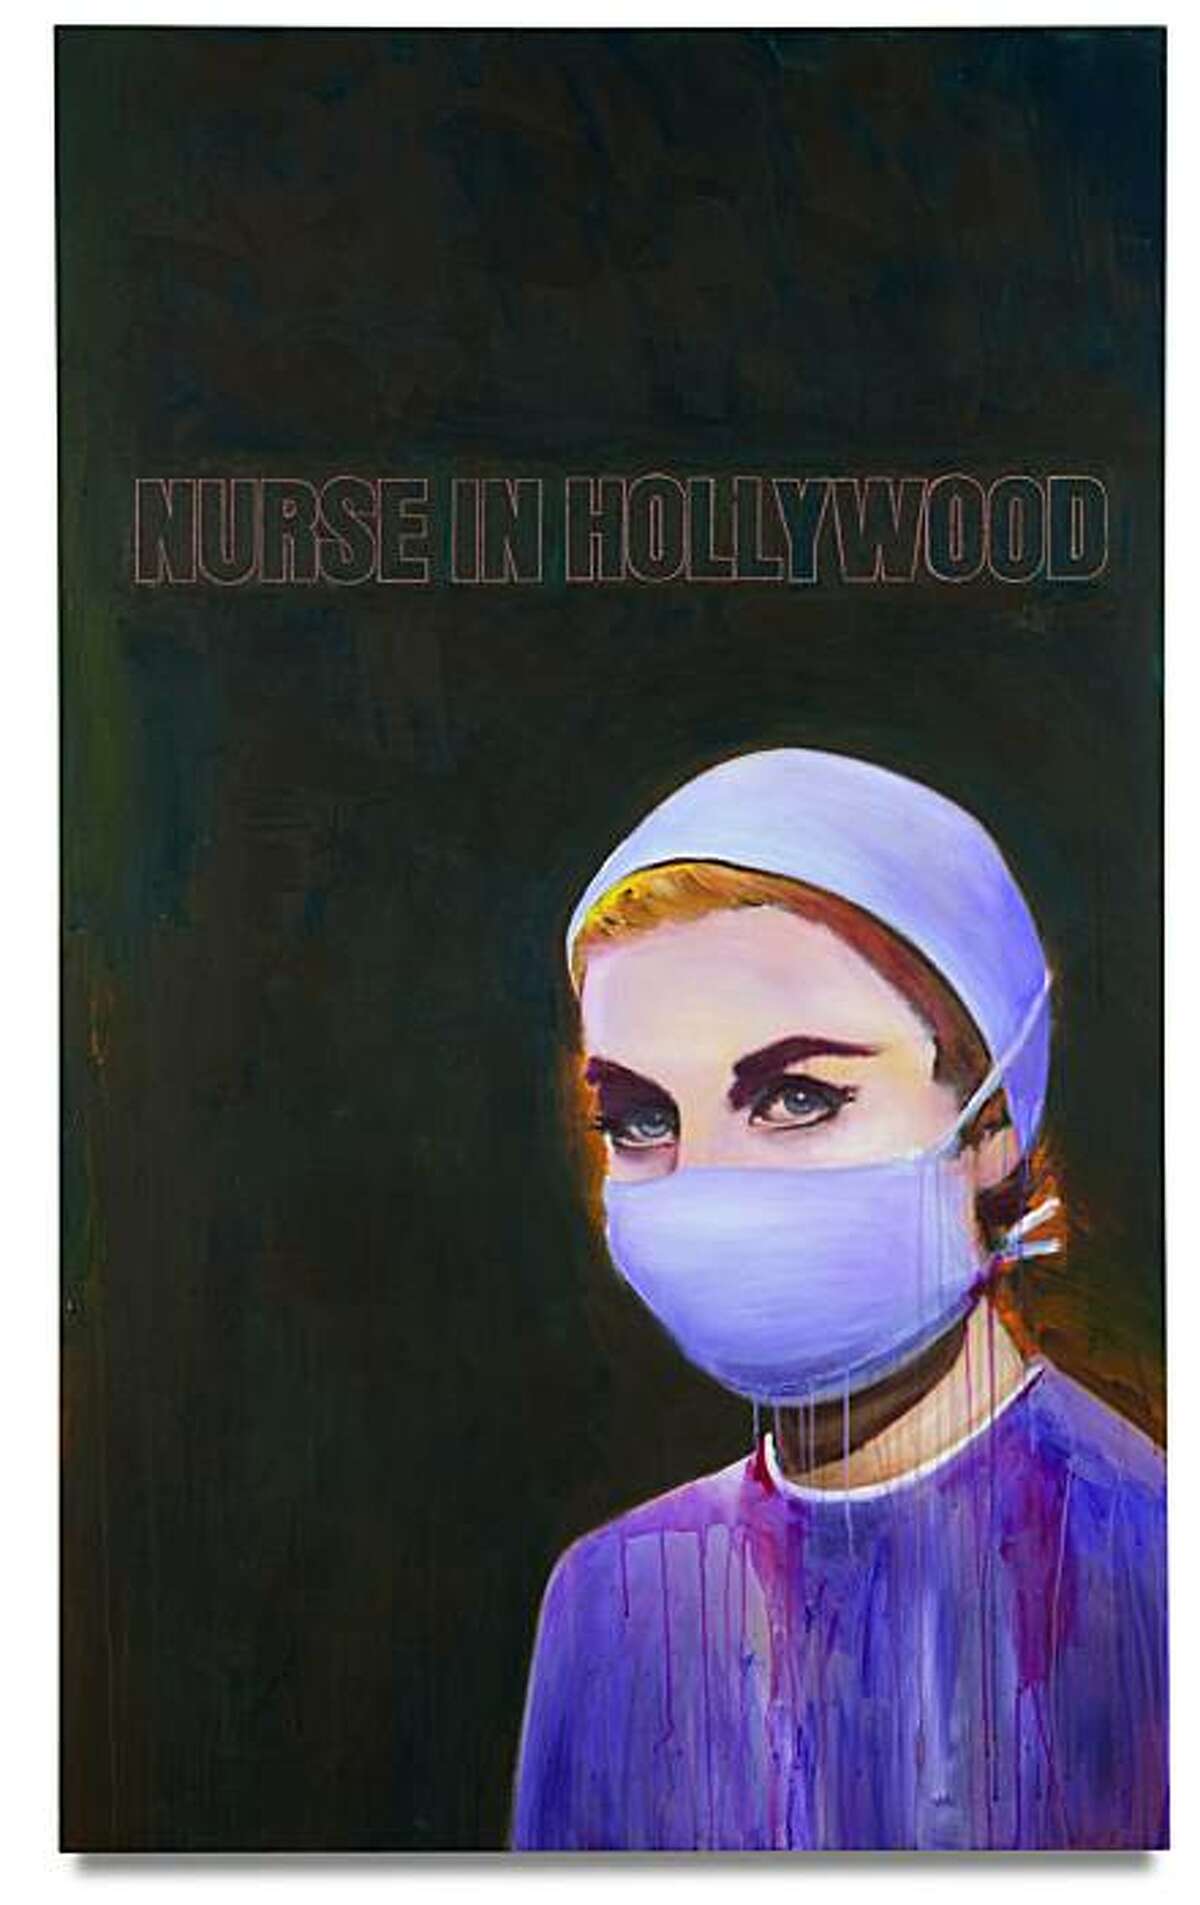 Richard Prince's "Nurse in Hollywood #4", currently owned by Halsey Minor, is going on the auction block with an estimated price of $5-7 million.